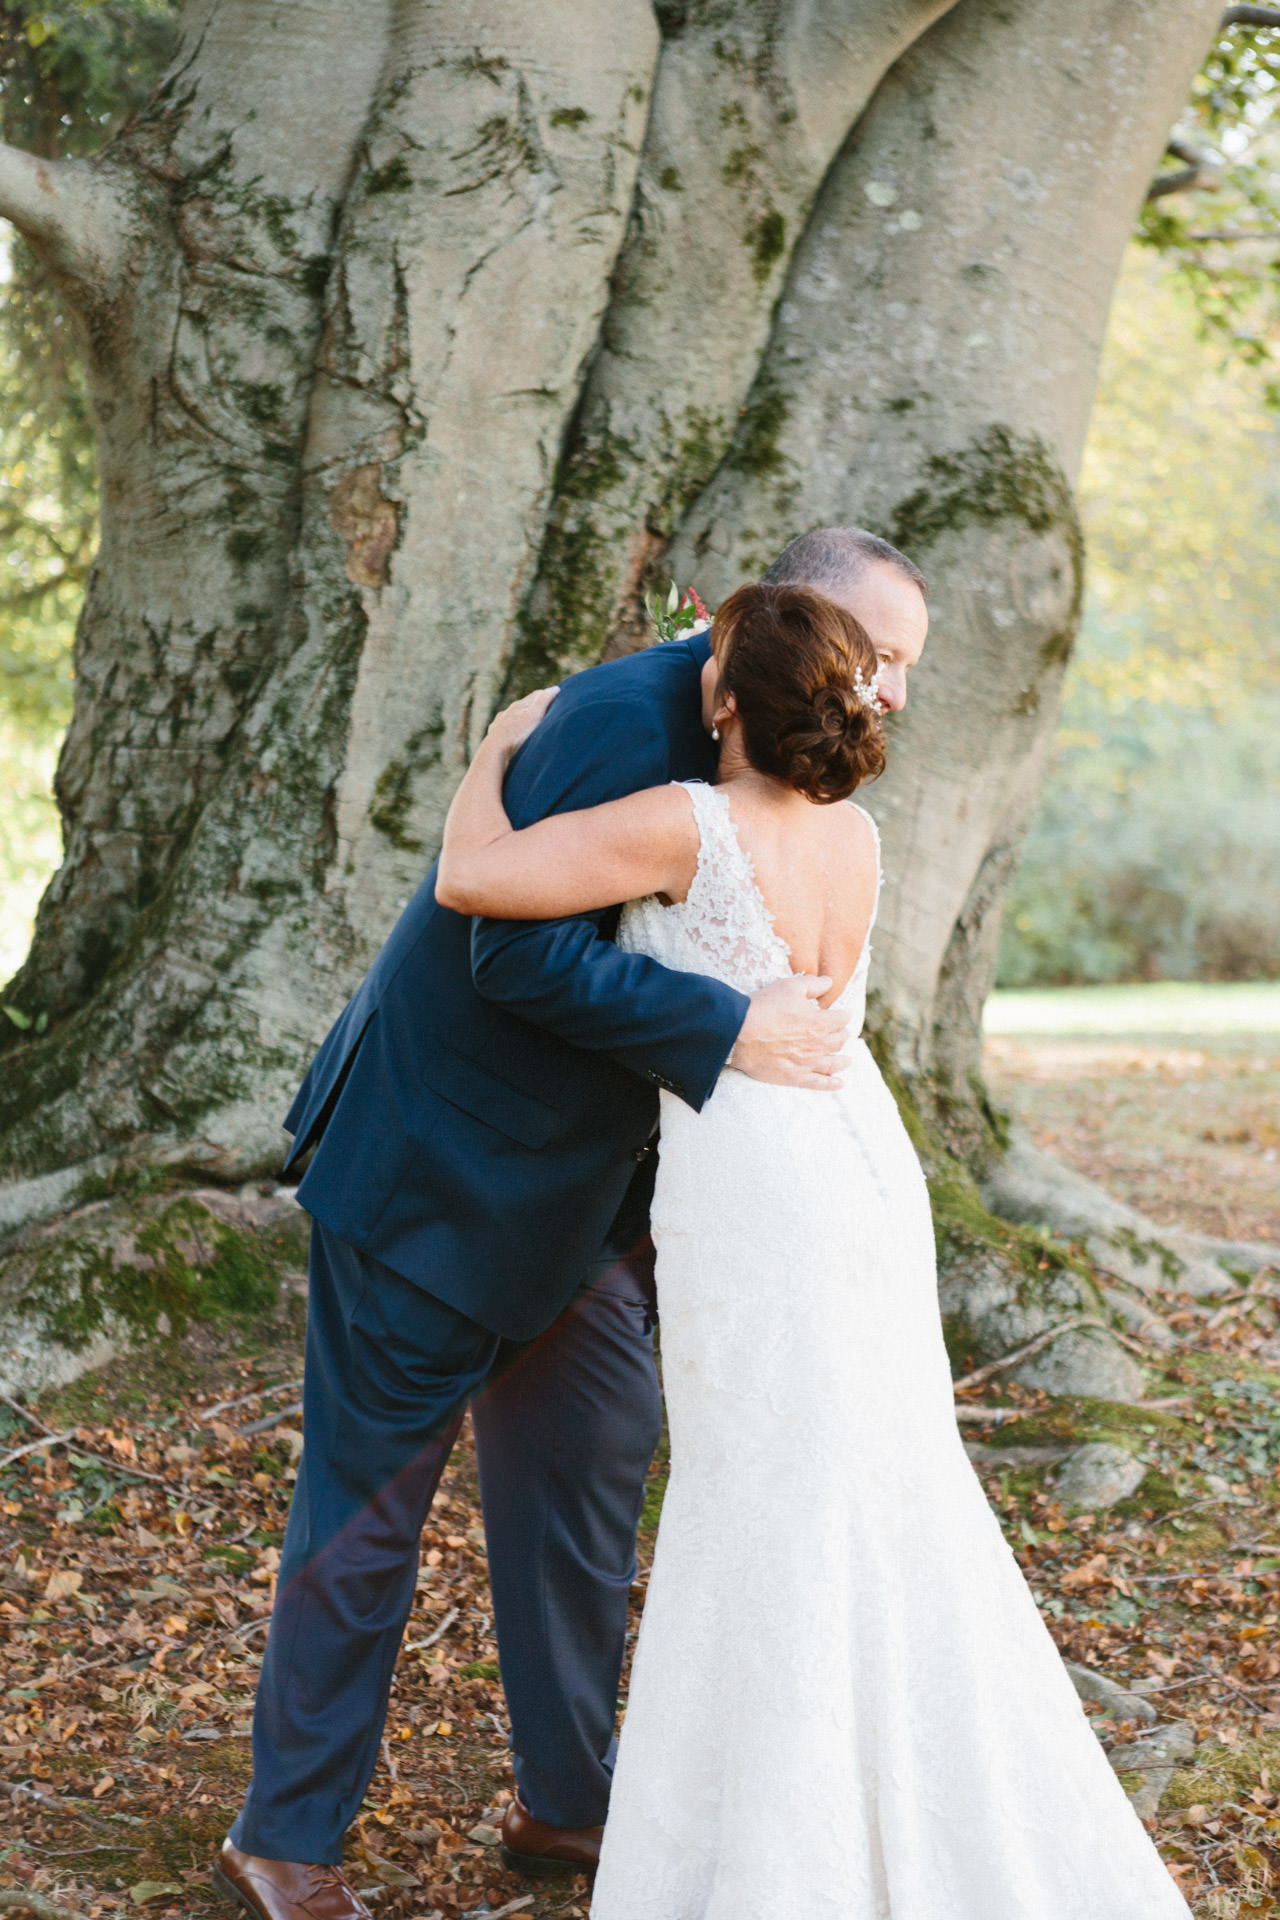 Bride and groom embracing and posing for a photograph